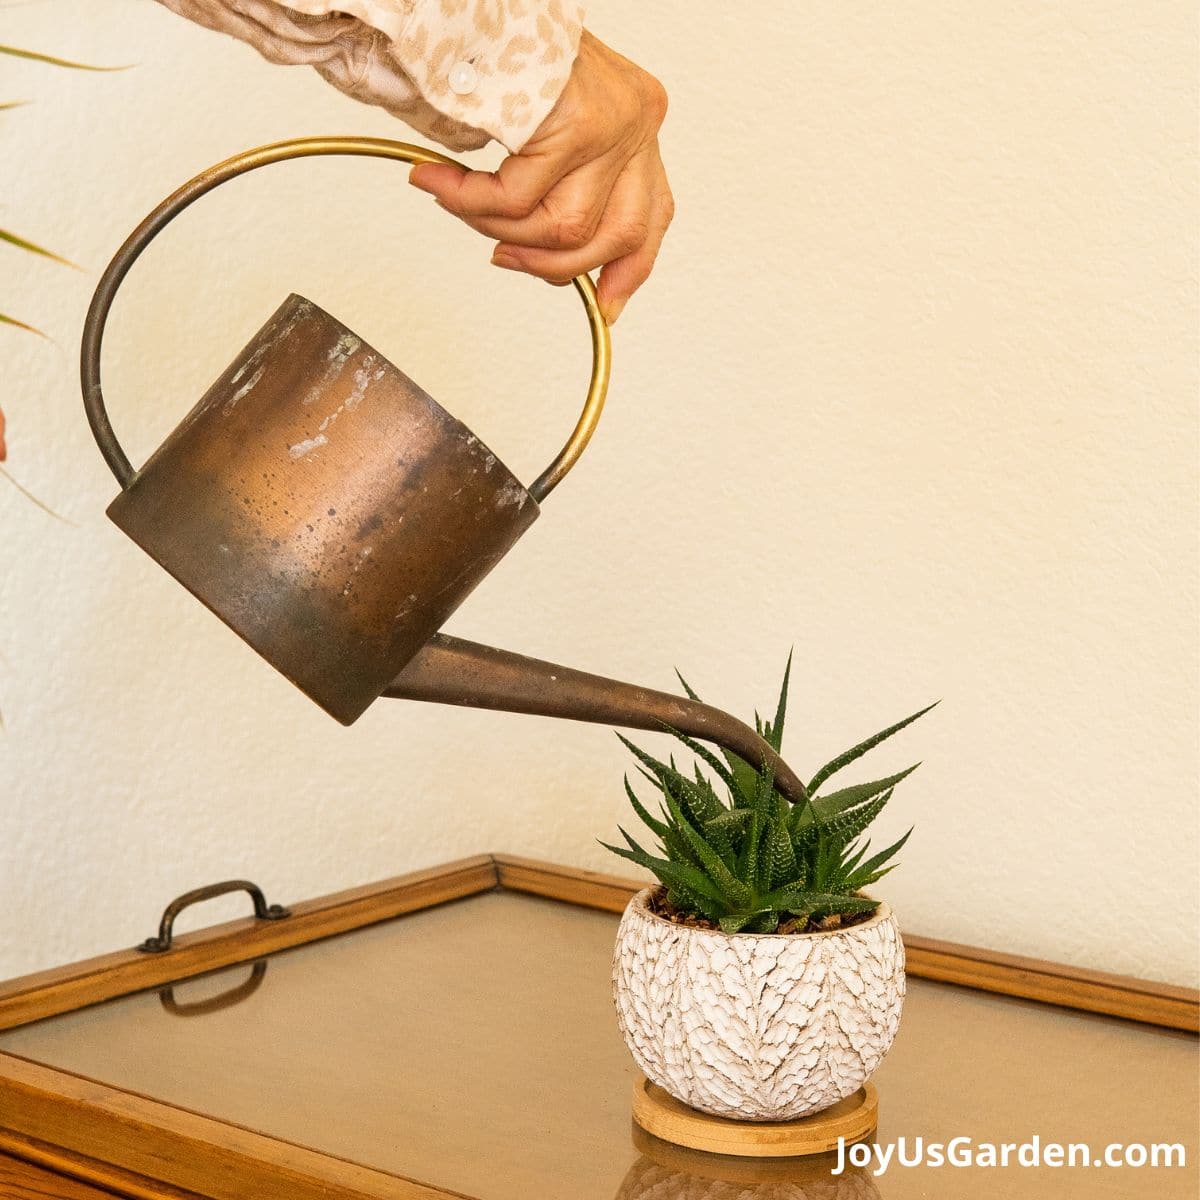 woman's hand shown holding a watering can and watering a haworthia in a small white pot